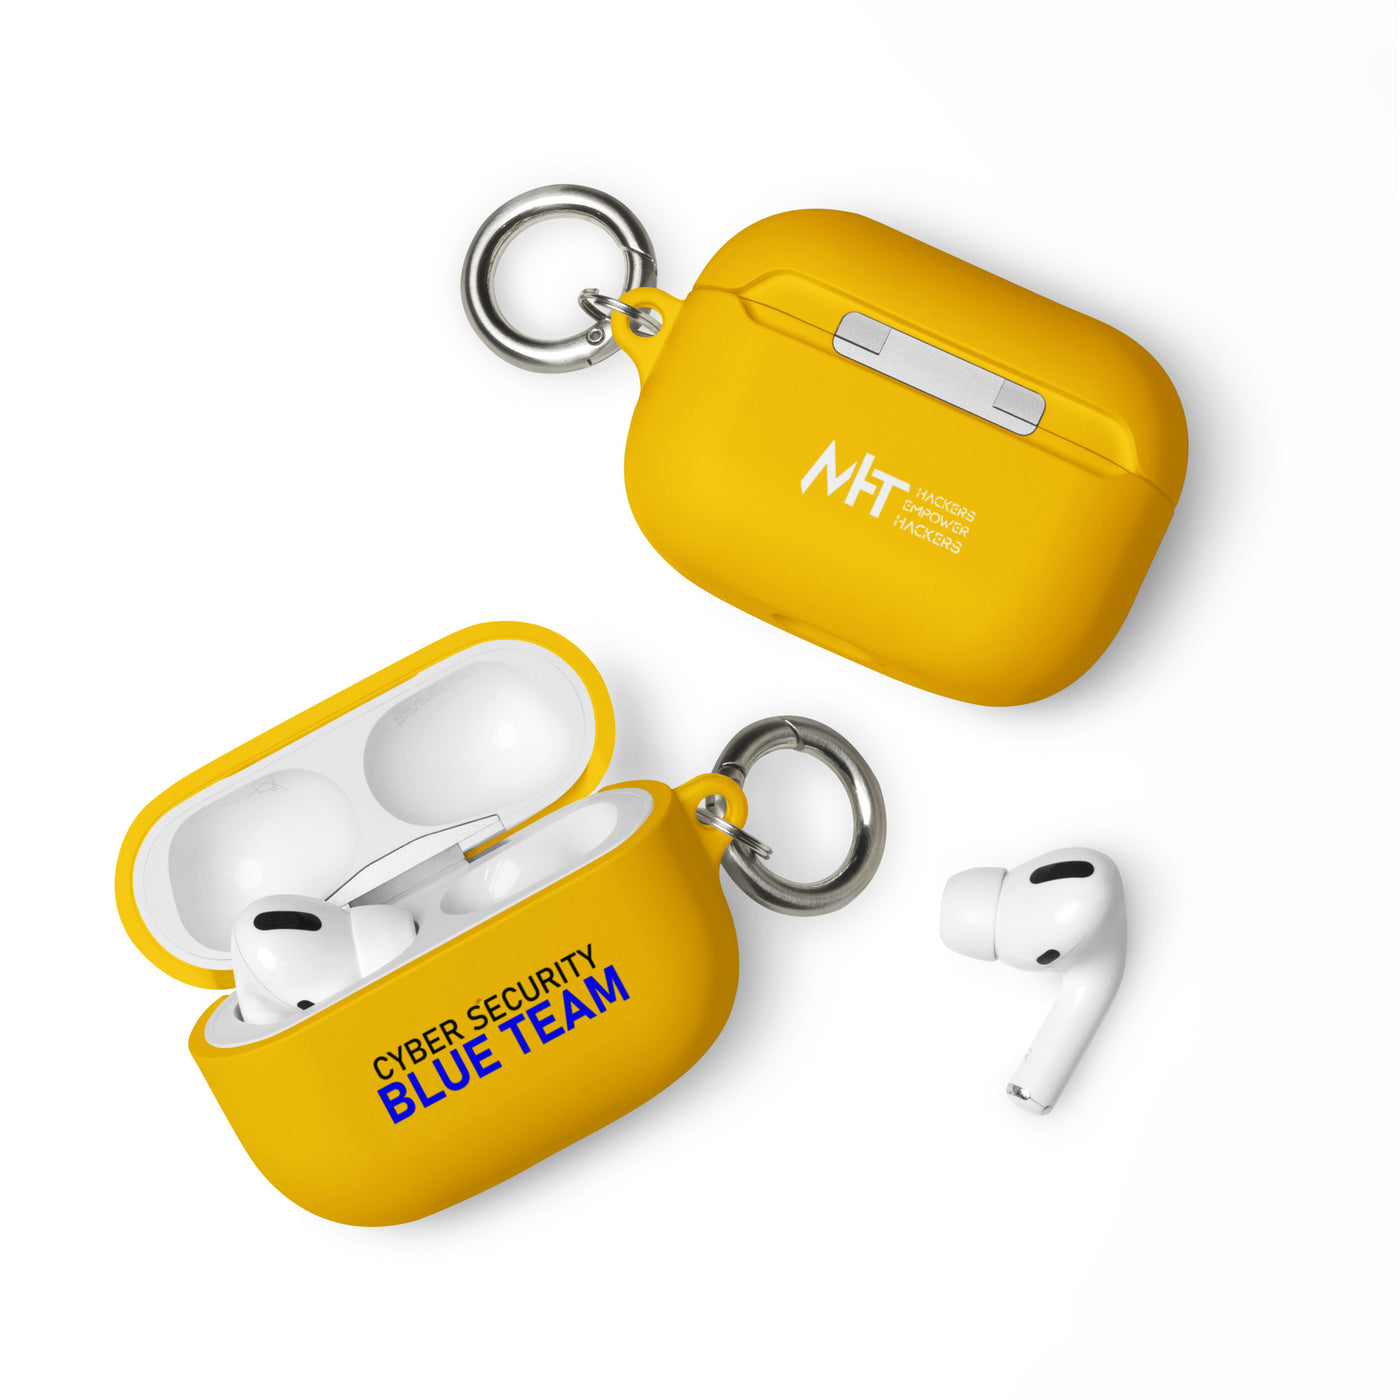 Cyber Security Blue Team - AirPods case